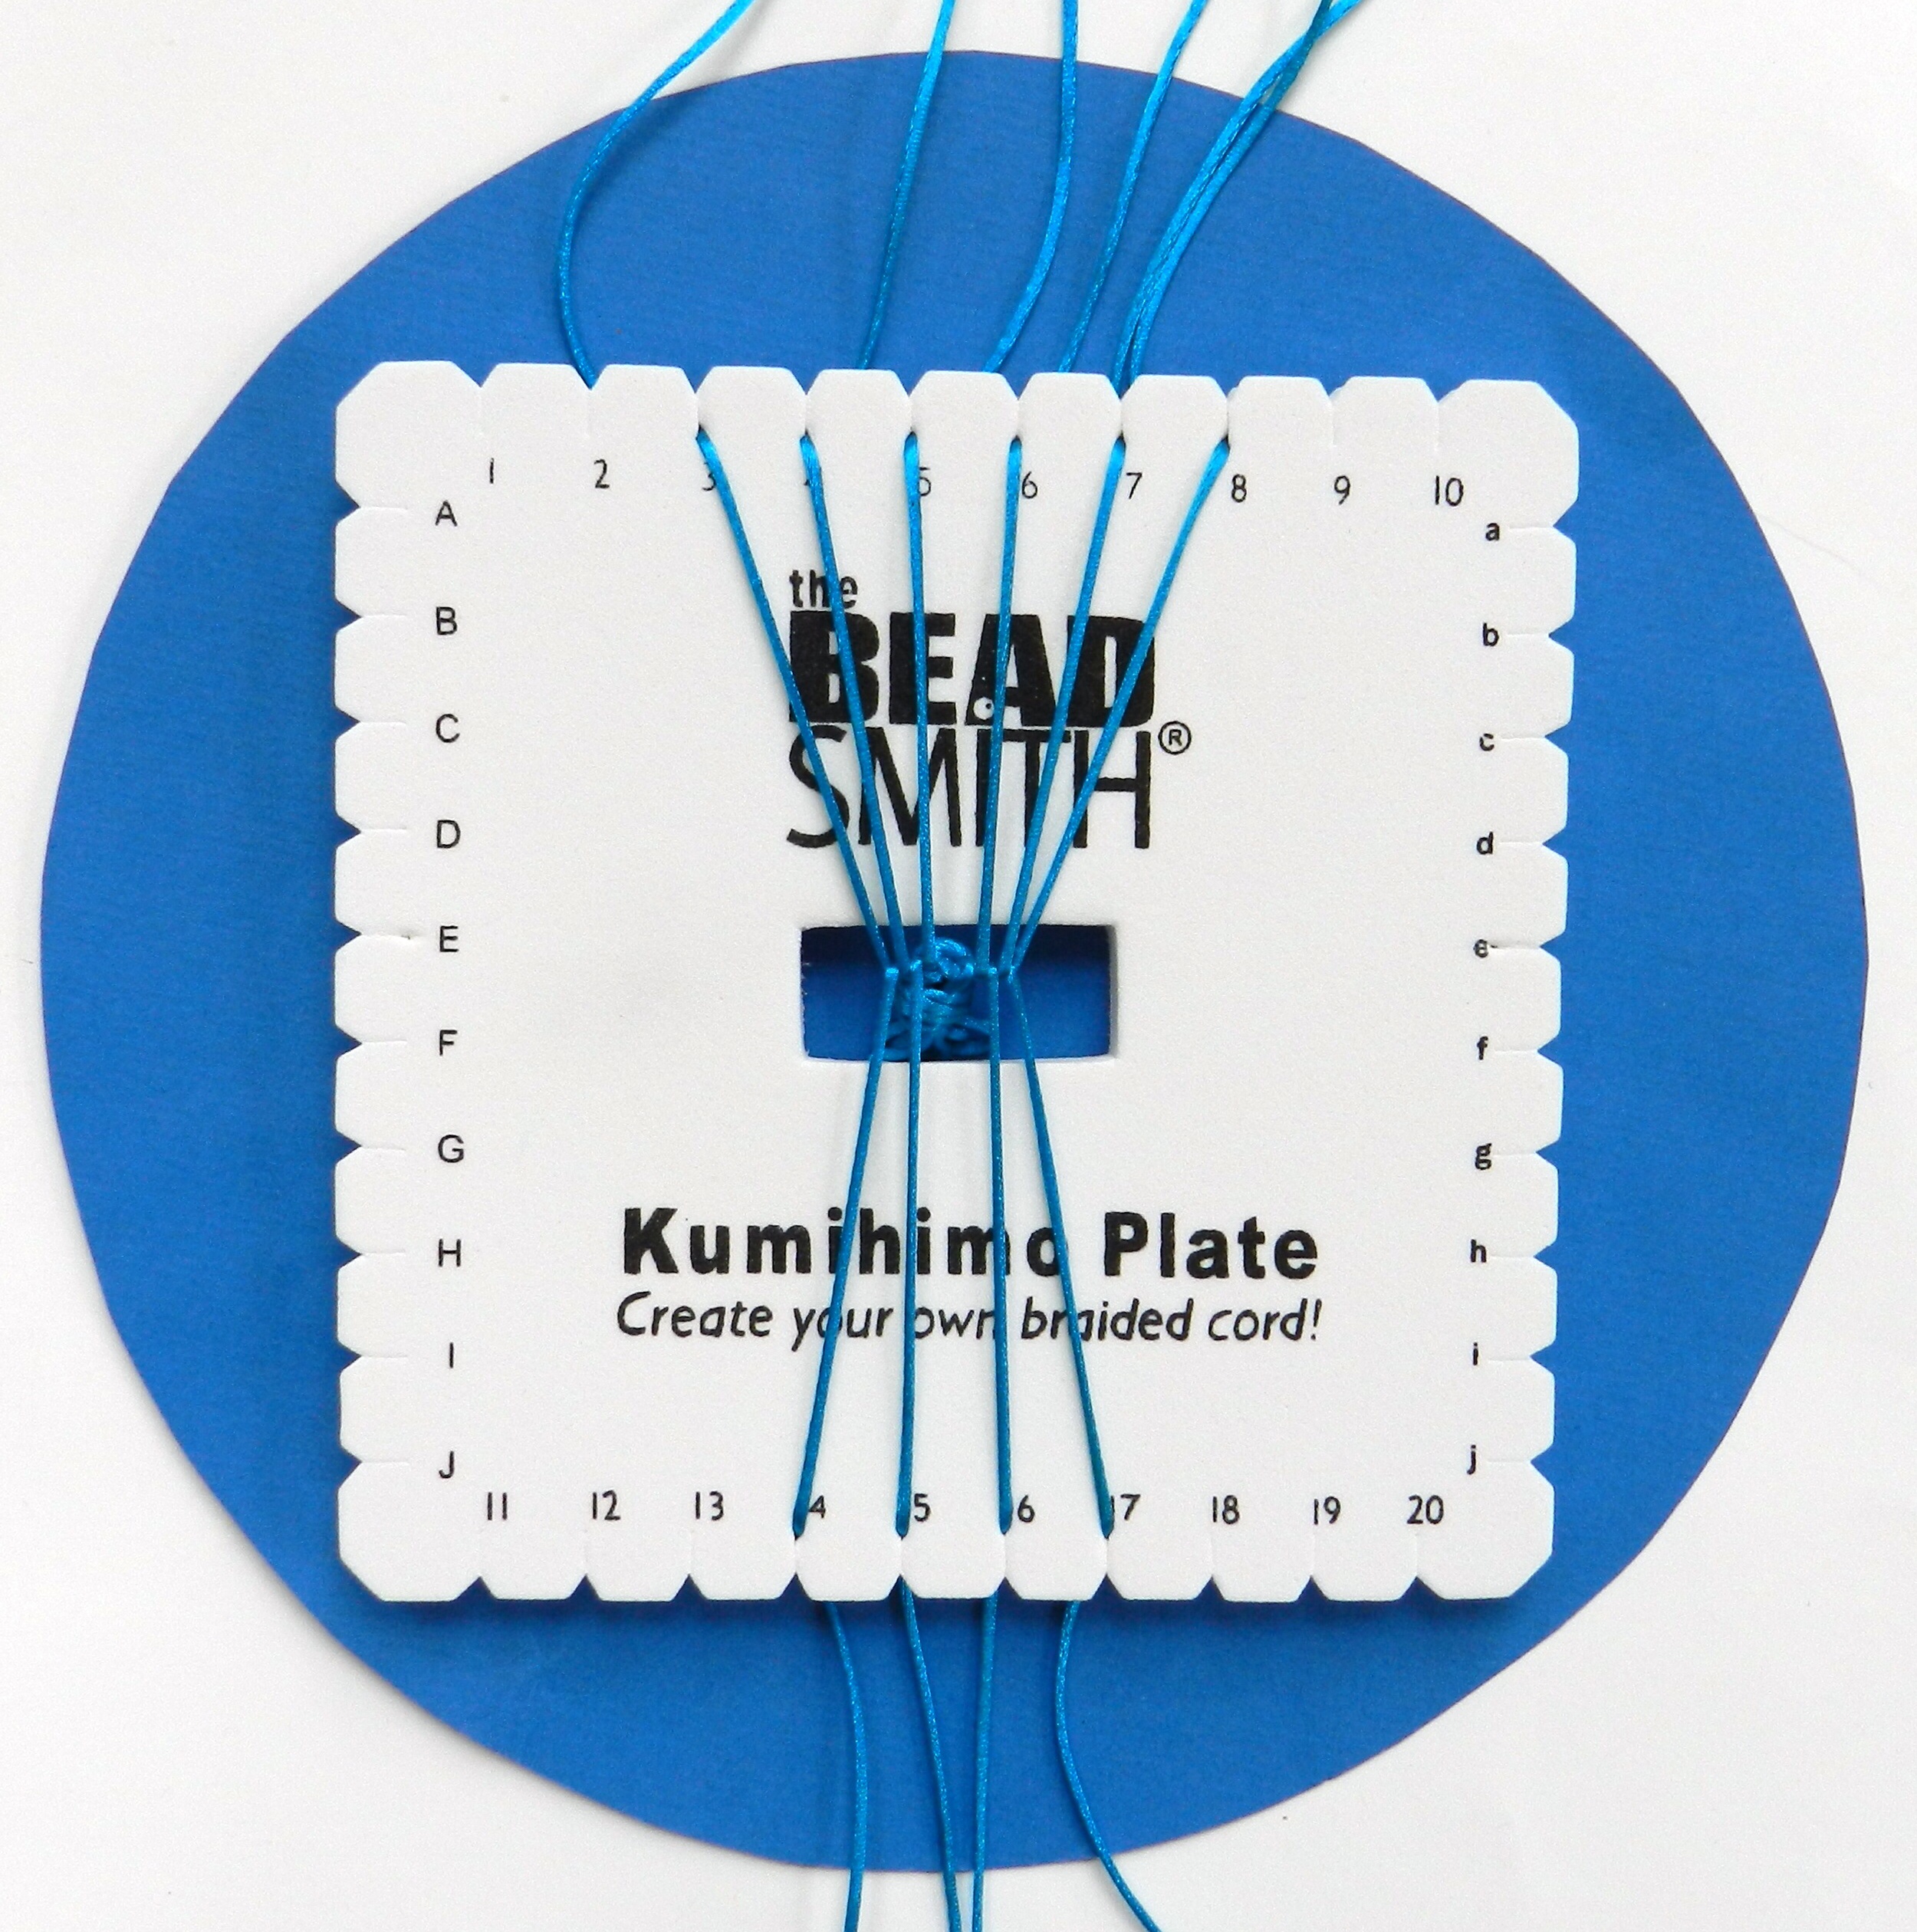 kumihimo square plate instructions